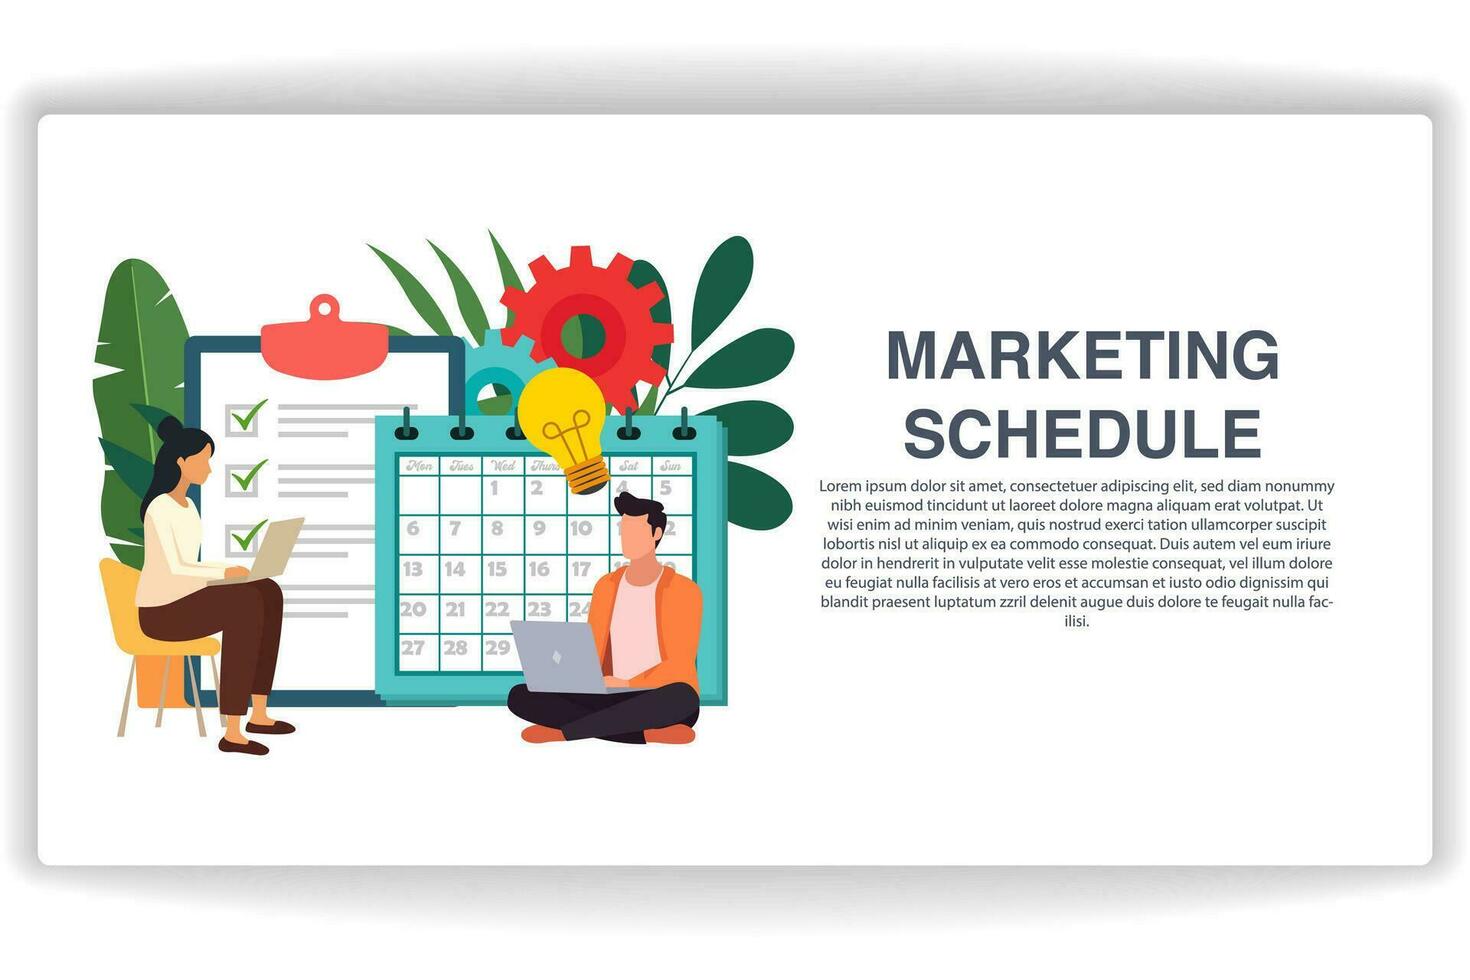 Men and women sitting looking at laptops. website page Marketing Schedule. Modern flat design concept of web page design for website and mobile website vector